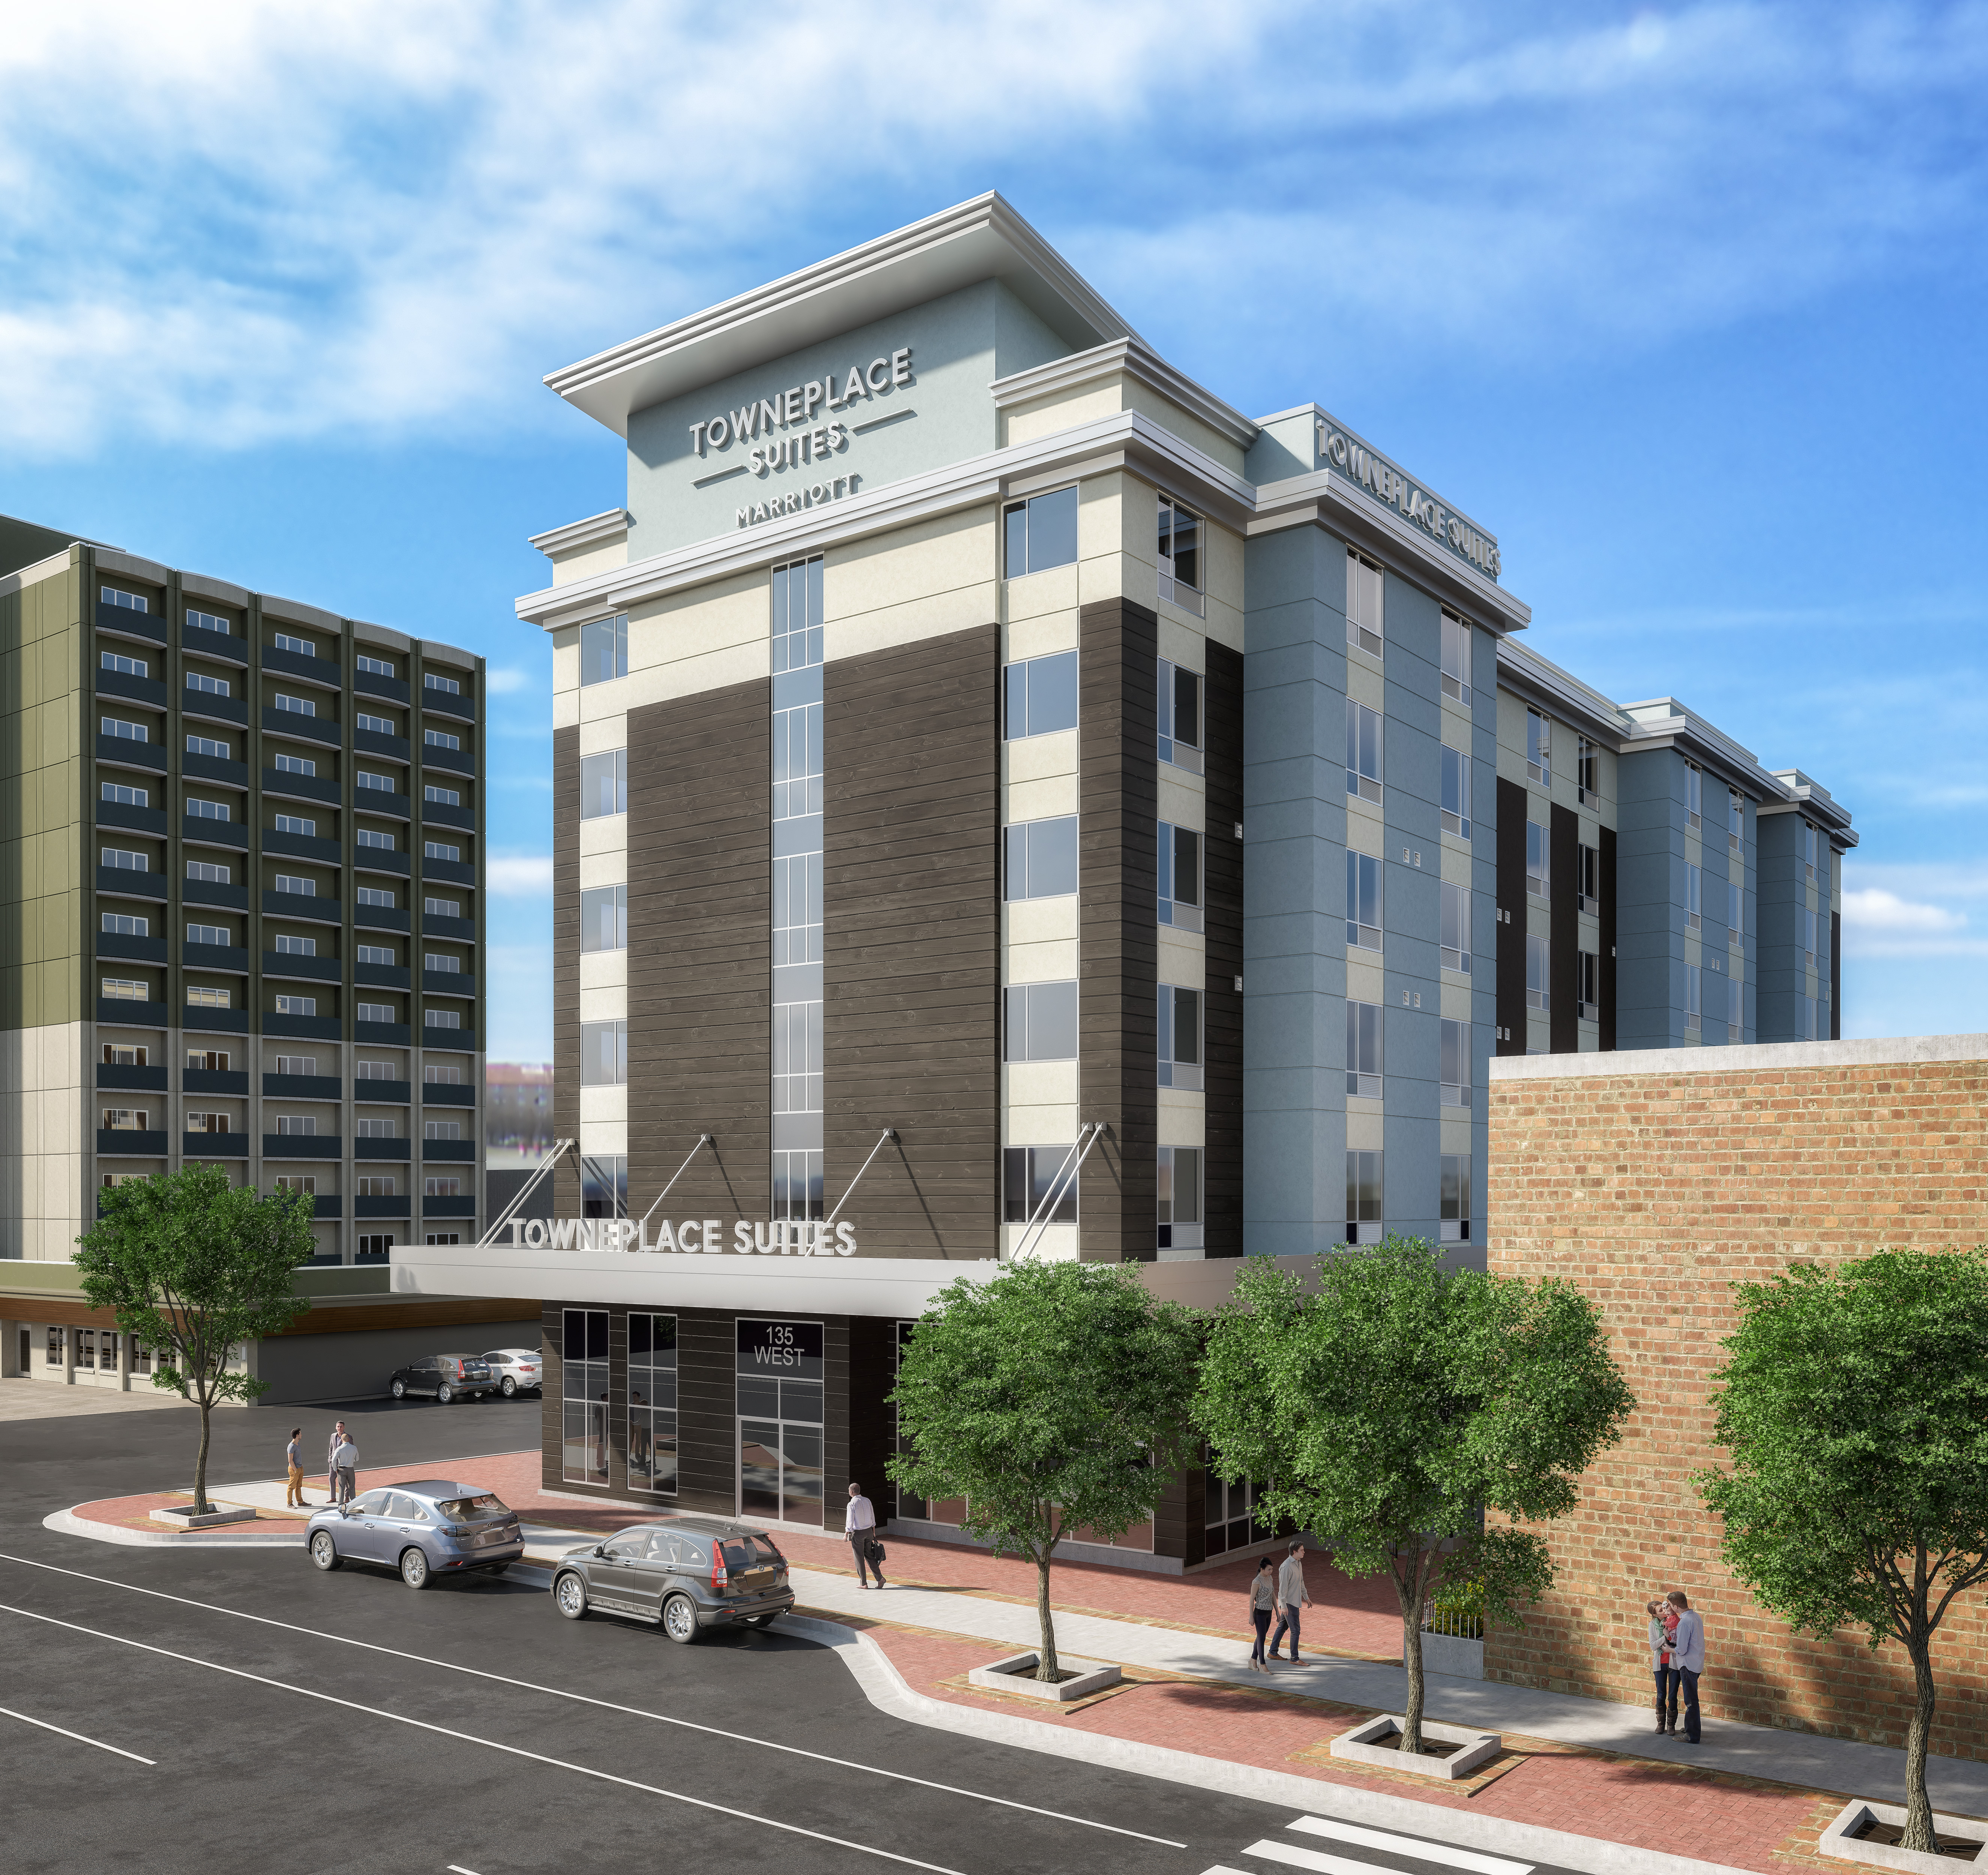 This extended-stay hotel is adding 95 rooms to the burgeoning Salt Lake City hotel market and it isnt wasting any space b